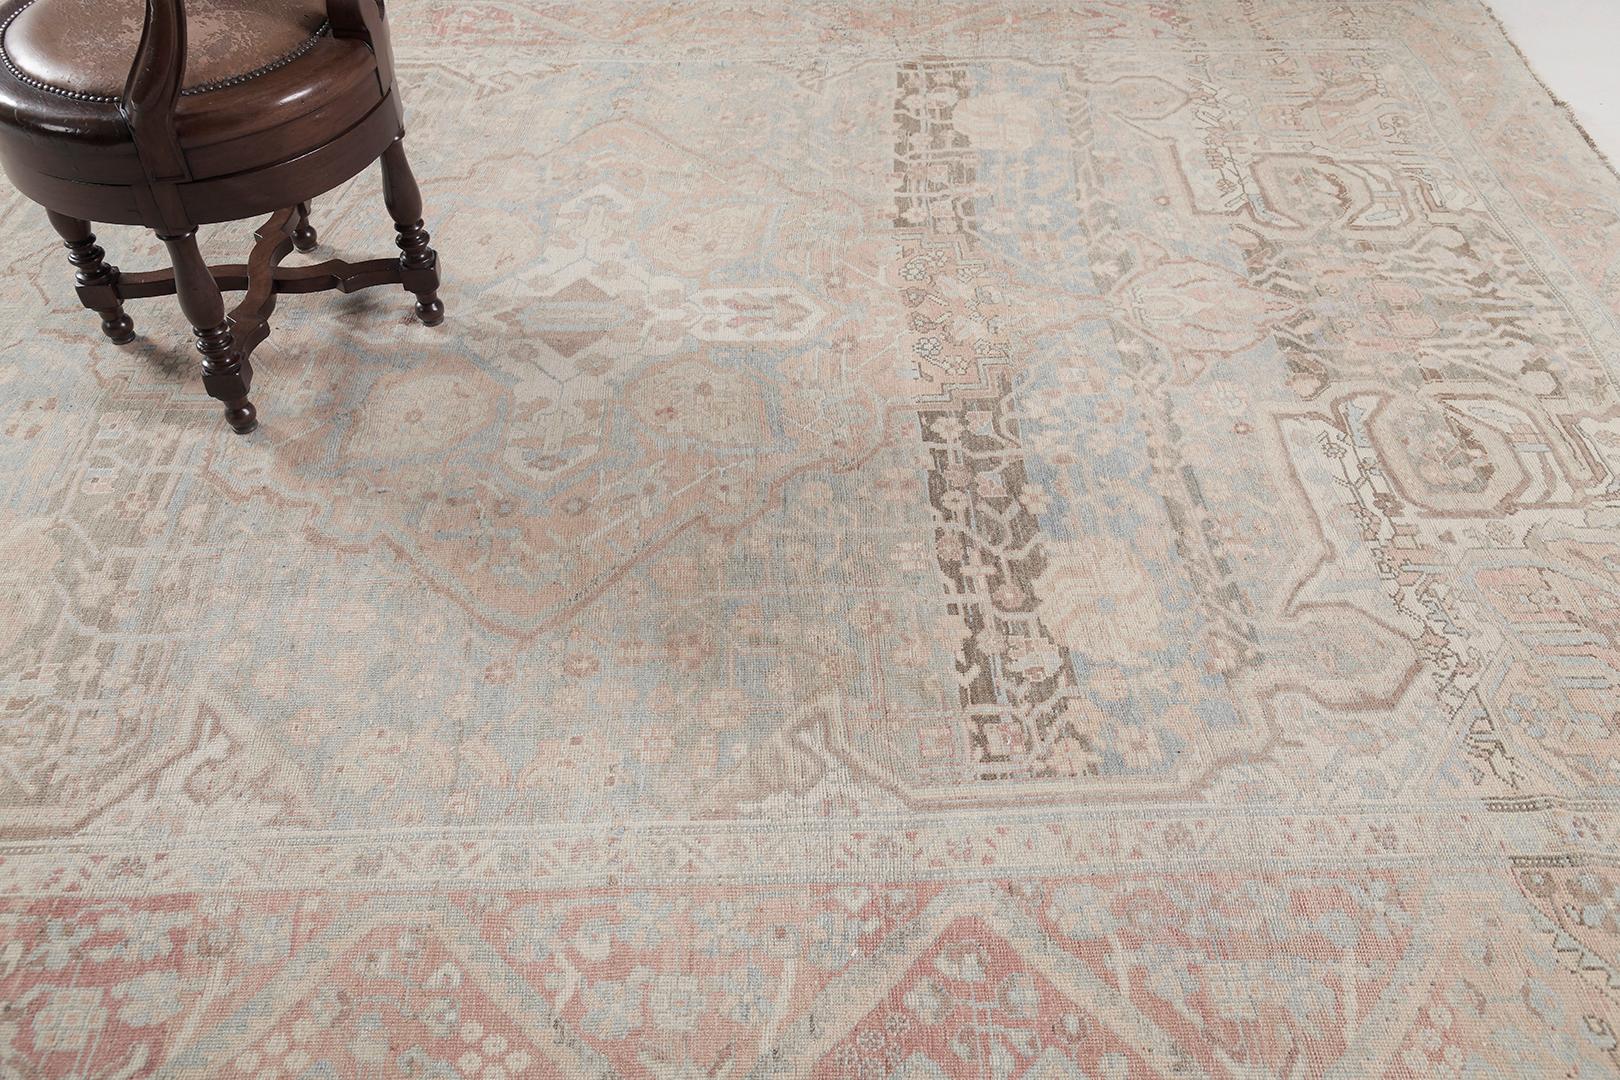 A magnificent antique Persian Bakhtiar rug with limitless forms that brings balance as each and every element cohesively unites with each other in a harmonious execution and composition. Featuring the majestic muted shades of dusty blue, tan, ecru,